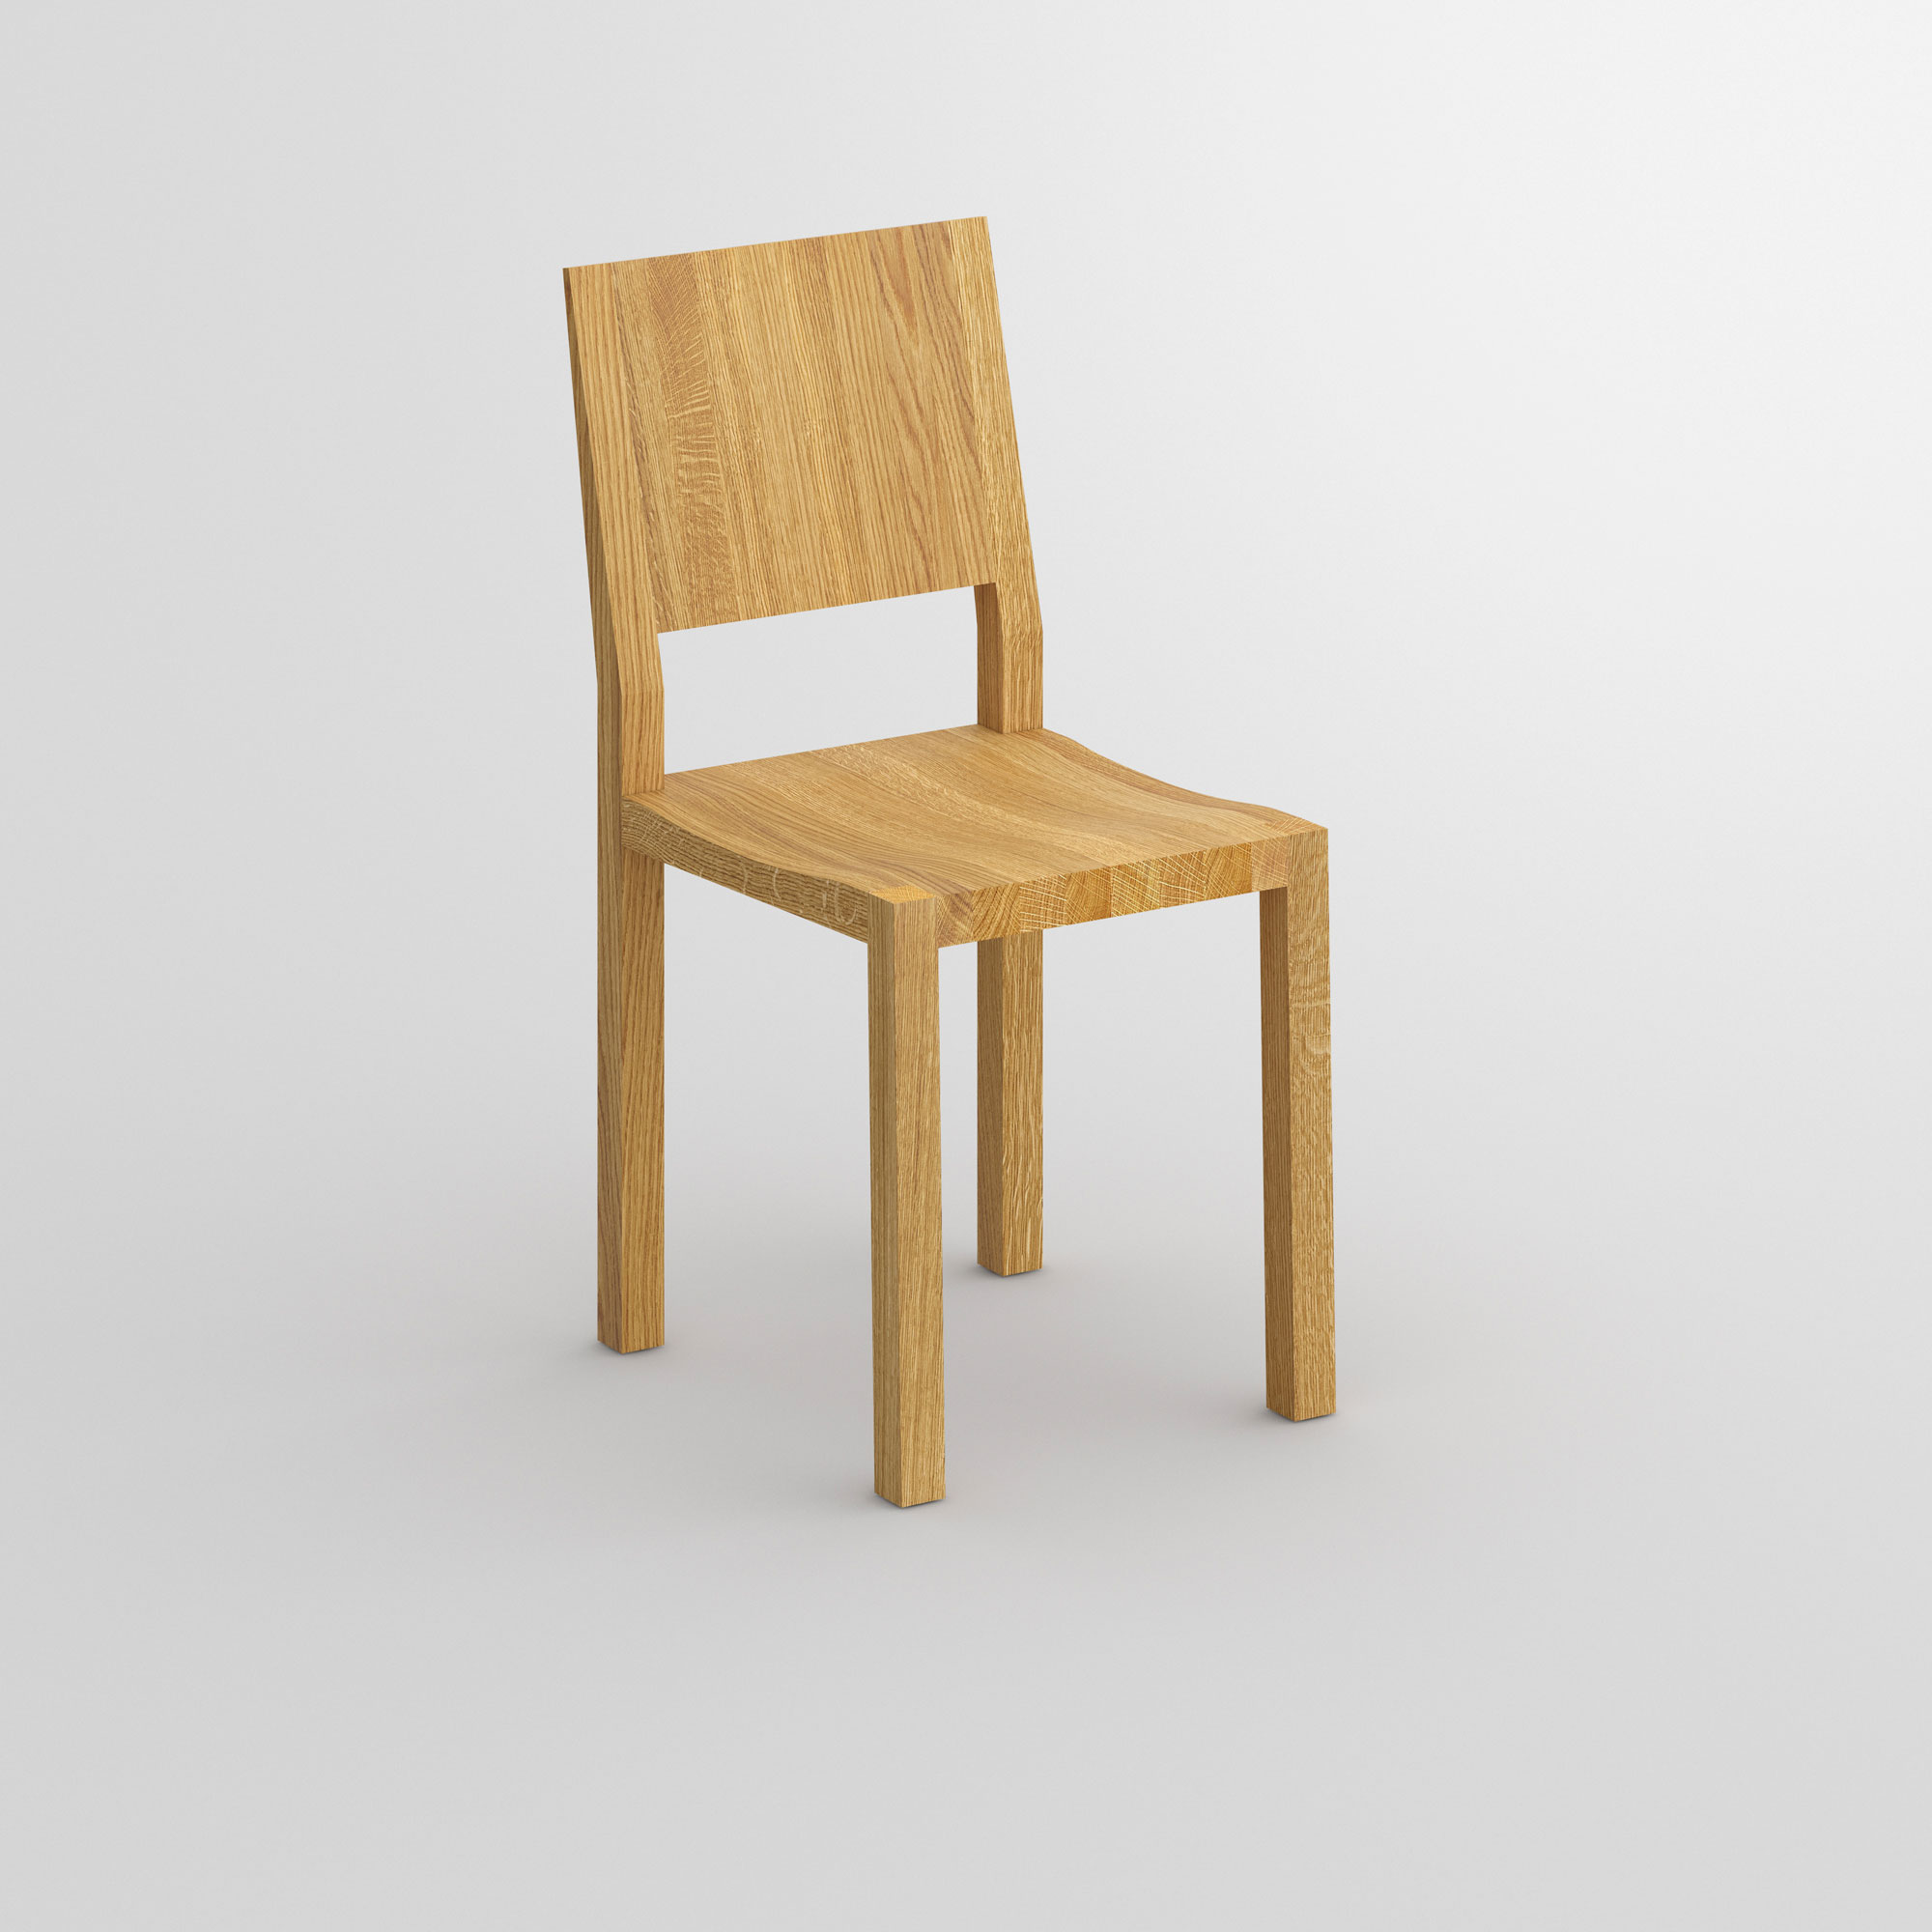 Solid Wood Chair TAU cam1 custom made in solid wood by vitamin design